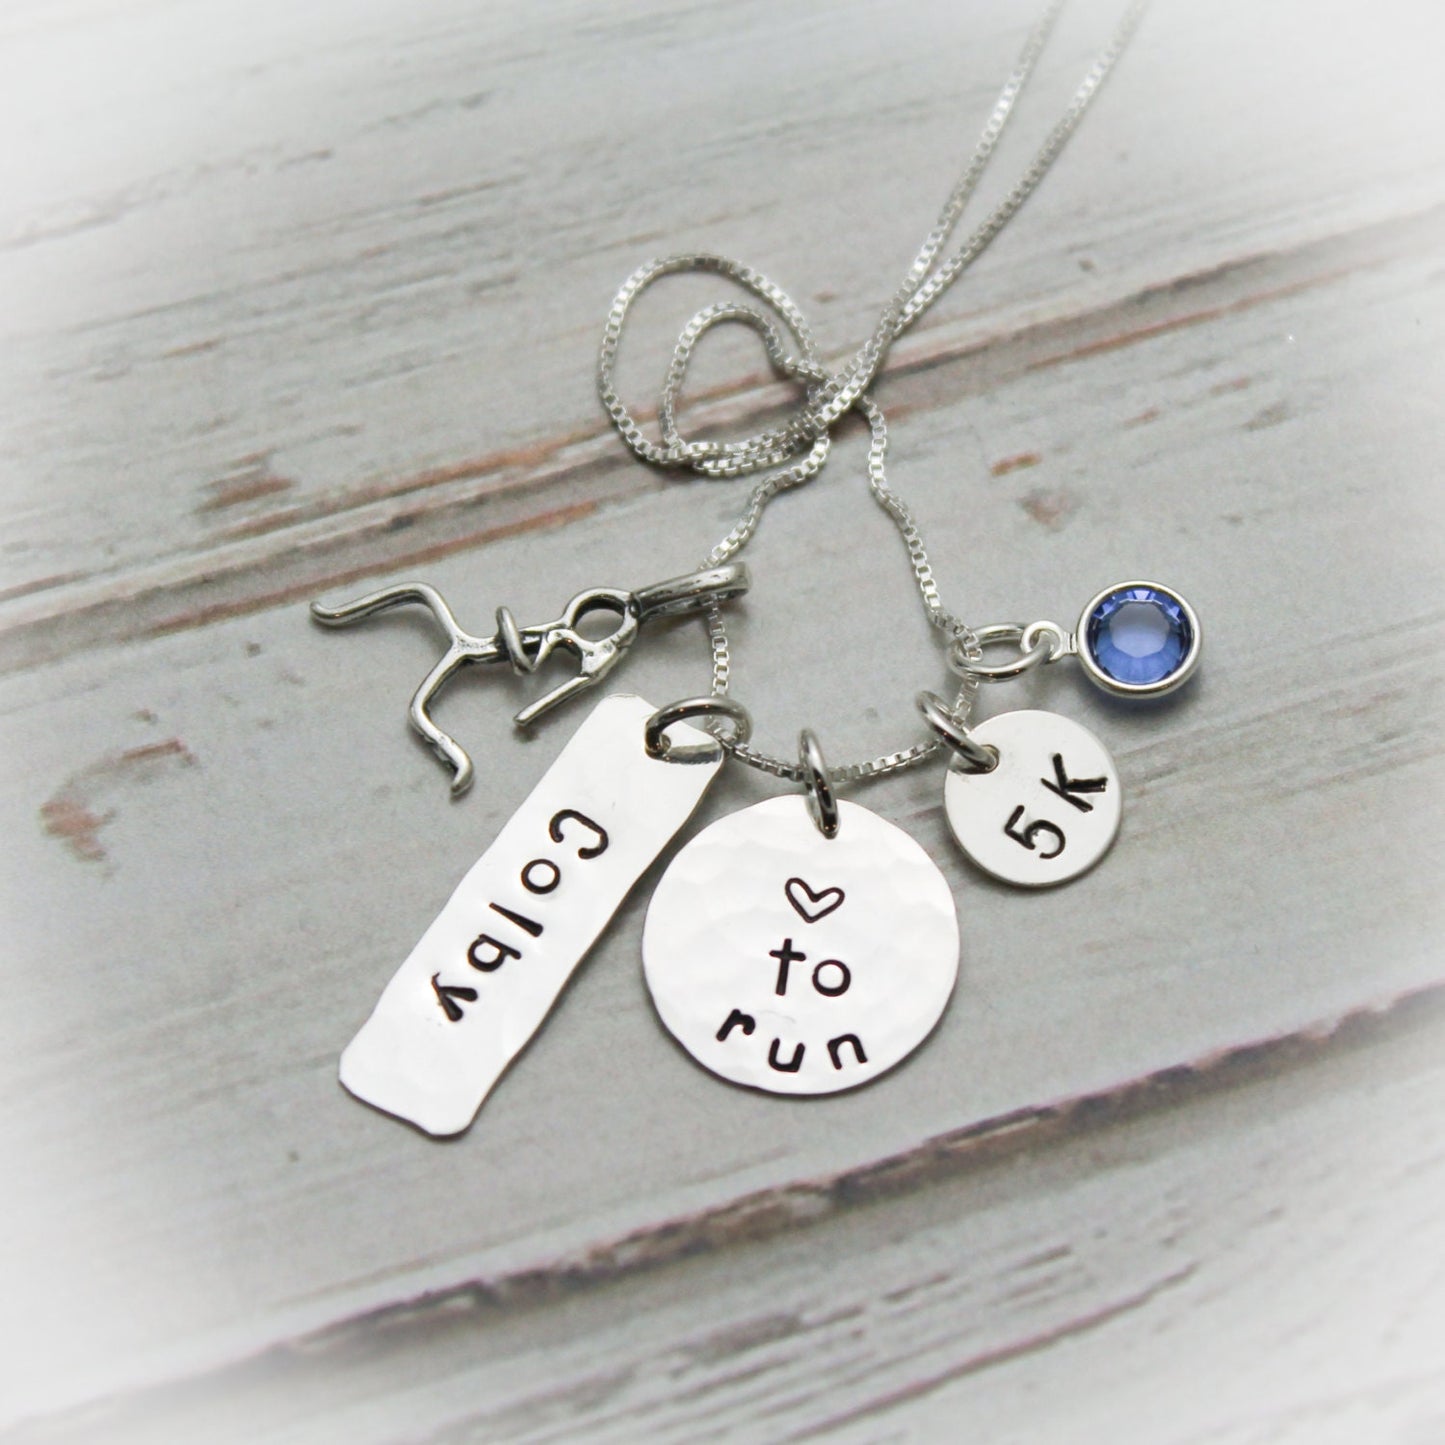 Personalized Love to Run Necklace, Marathon Necklace, Runner Necklace, Running Necklace, Marathon Gift, Runner Gift, Hand Stamped Necklace